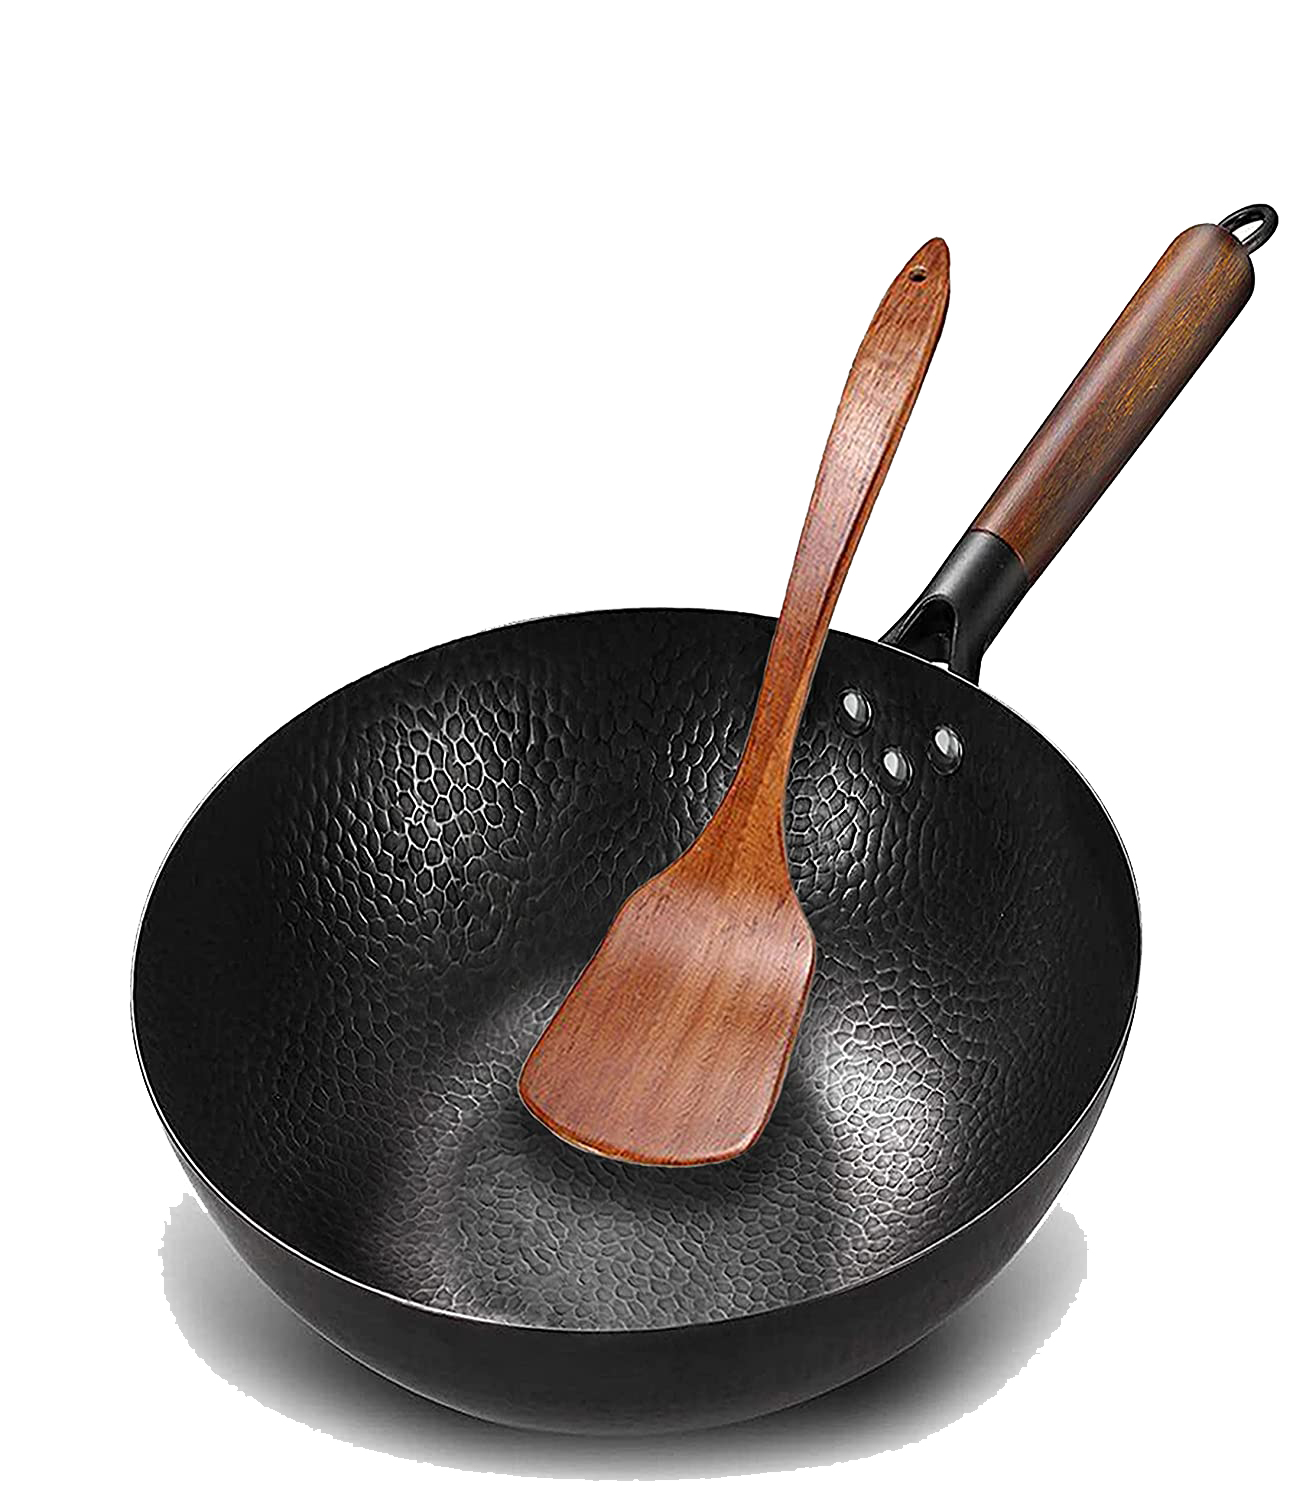 wok shown with wooden spoon